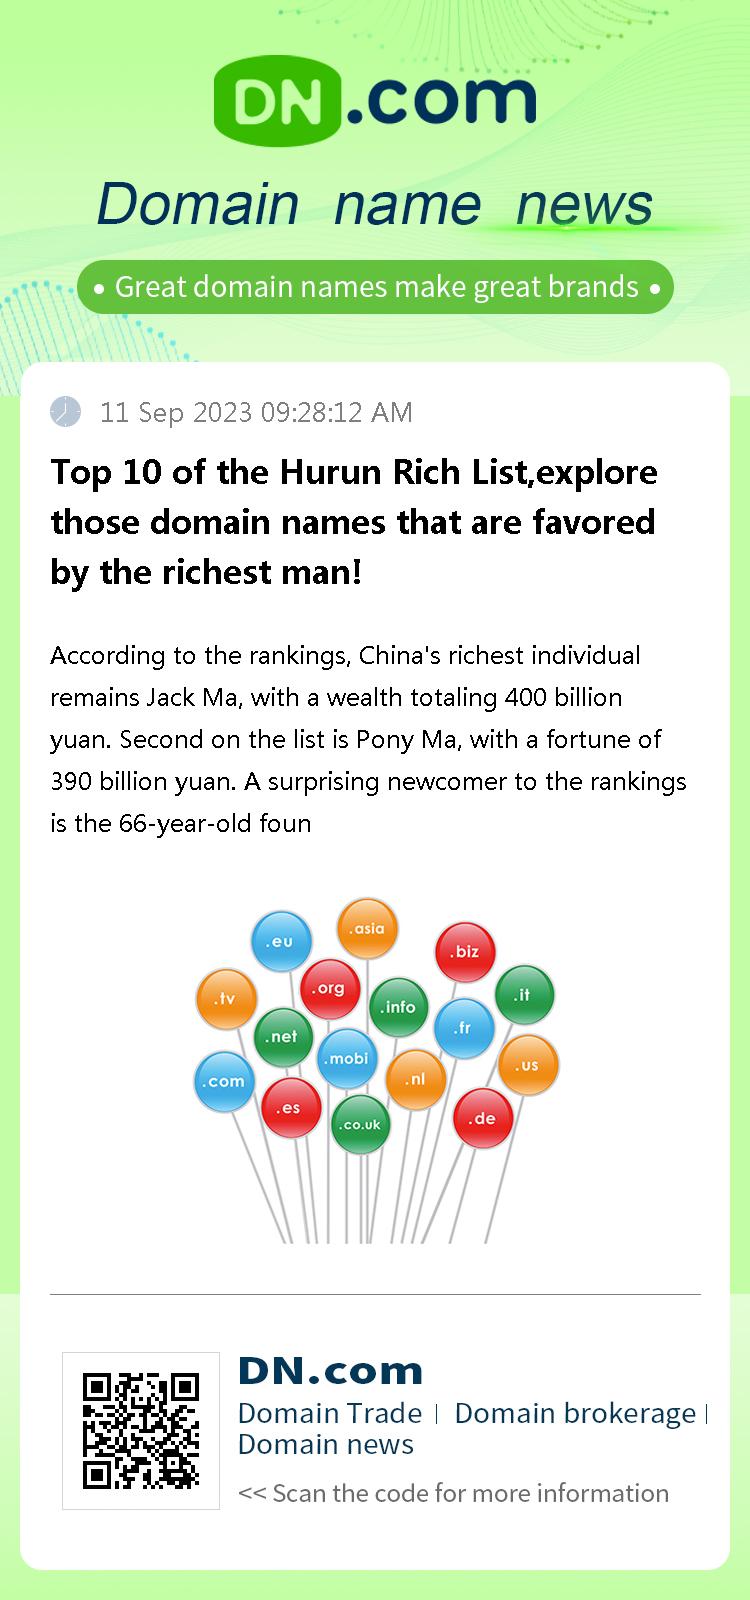 Top 10 of the Hurun Rich List,explore those domain names that are favored by the richest man!